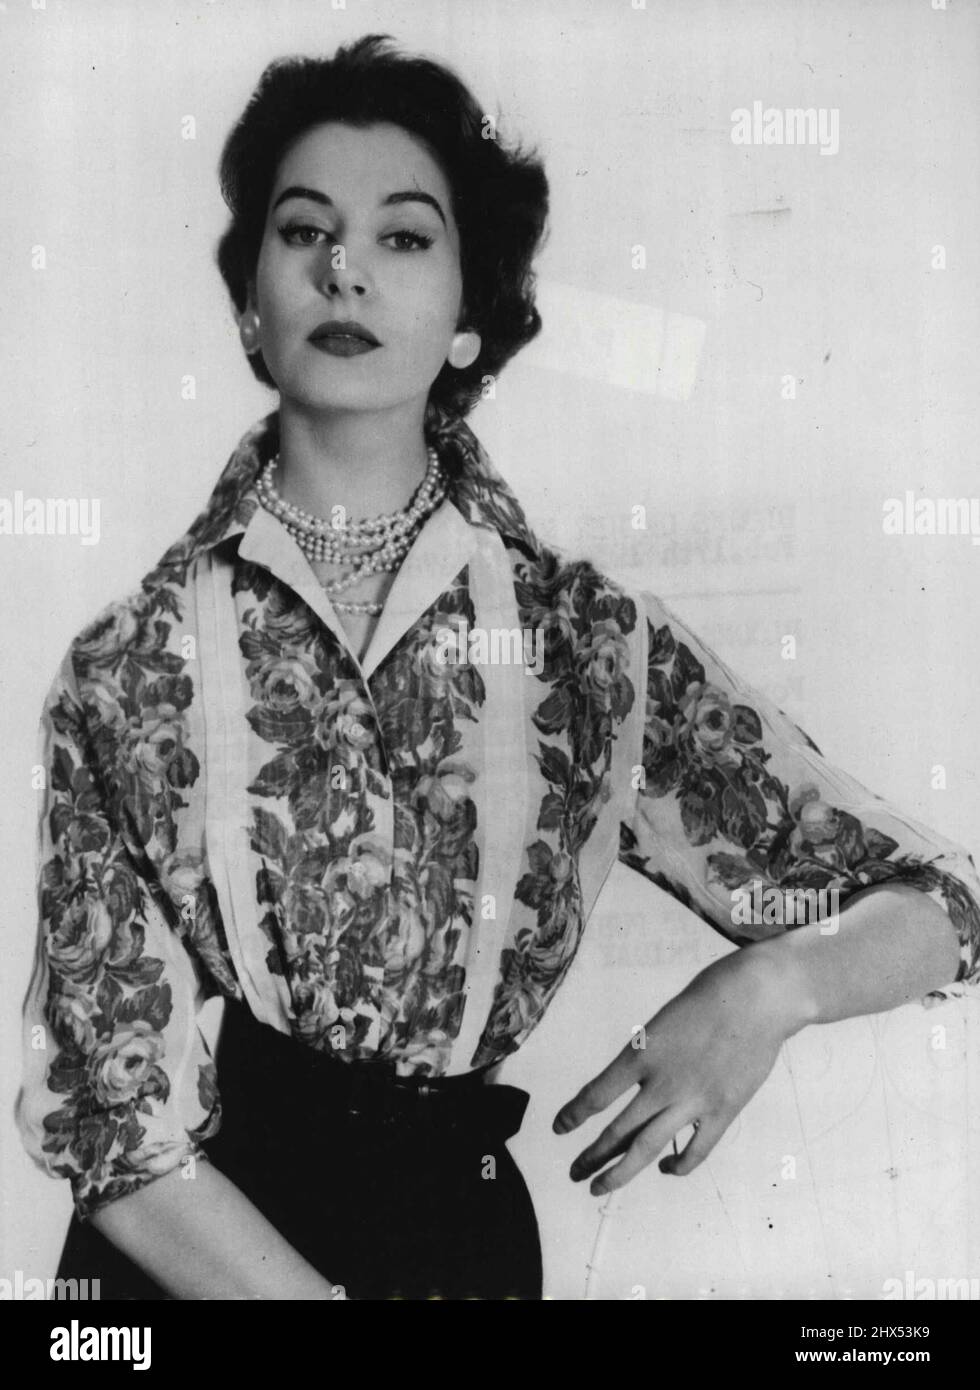 Blooms On Her Blouse -- For summer smartness is offered this shirt-blouse in Sudan cotton, featuring flower-stripes. Named ' Ann Hathaway ' by its designer, Digby Morton, it should be just the thing ' for those warm June days - that we sometimes get!. February 17, 1955. (Photo by Reuterphoto). Stock Photo